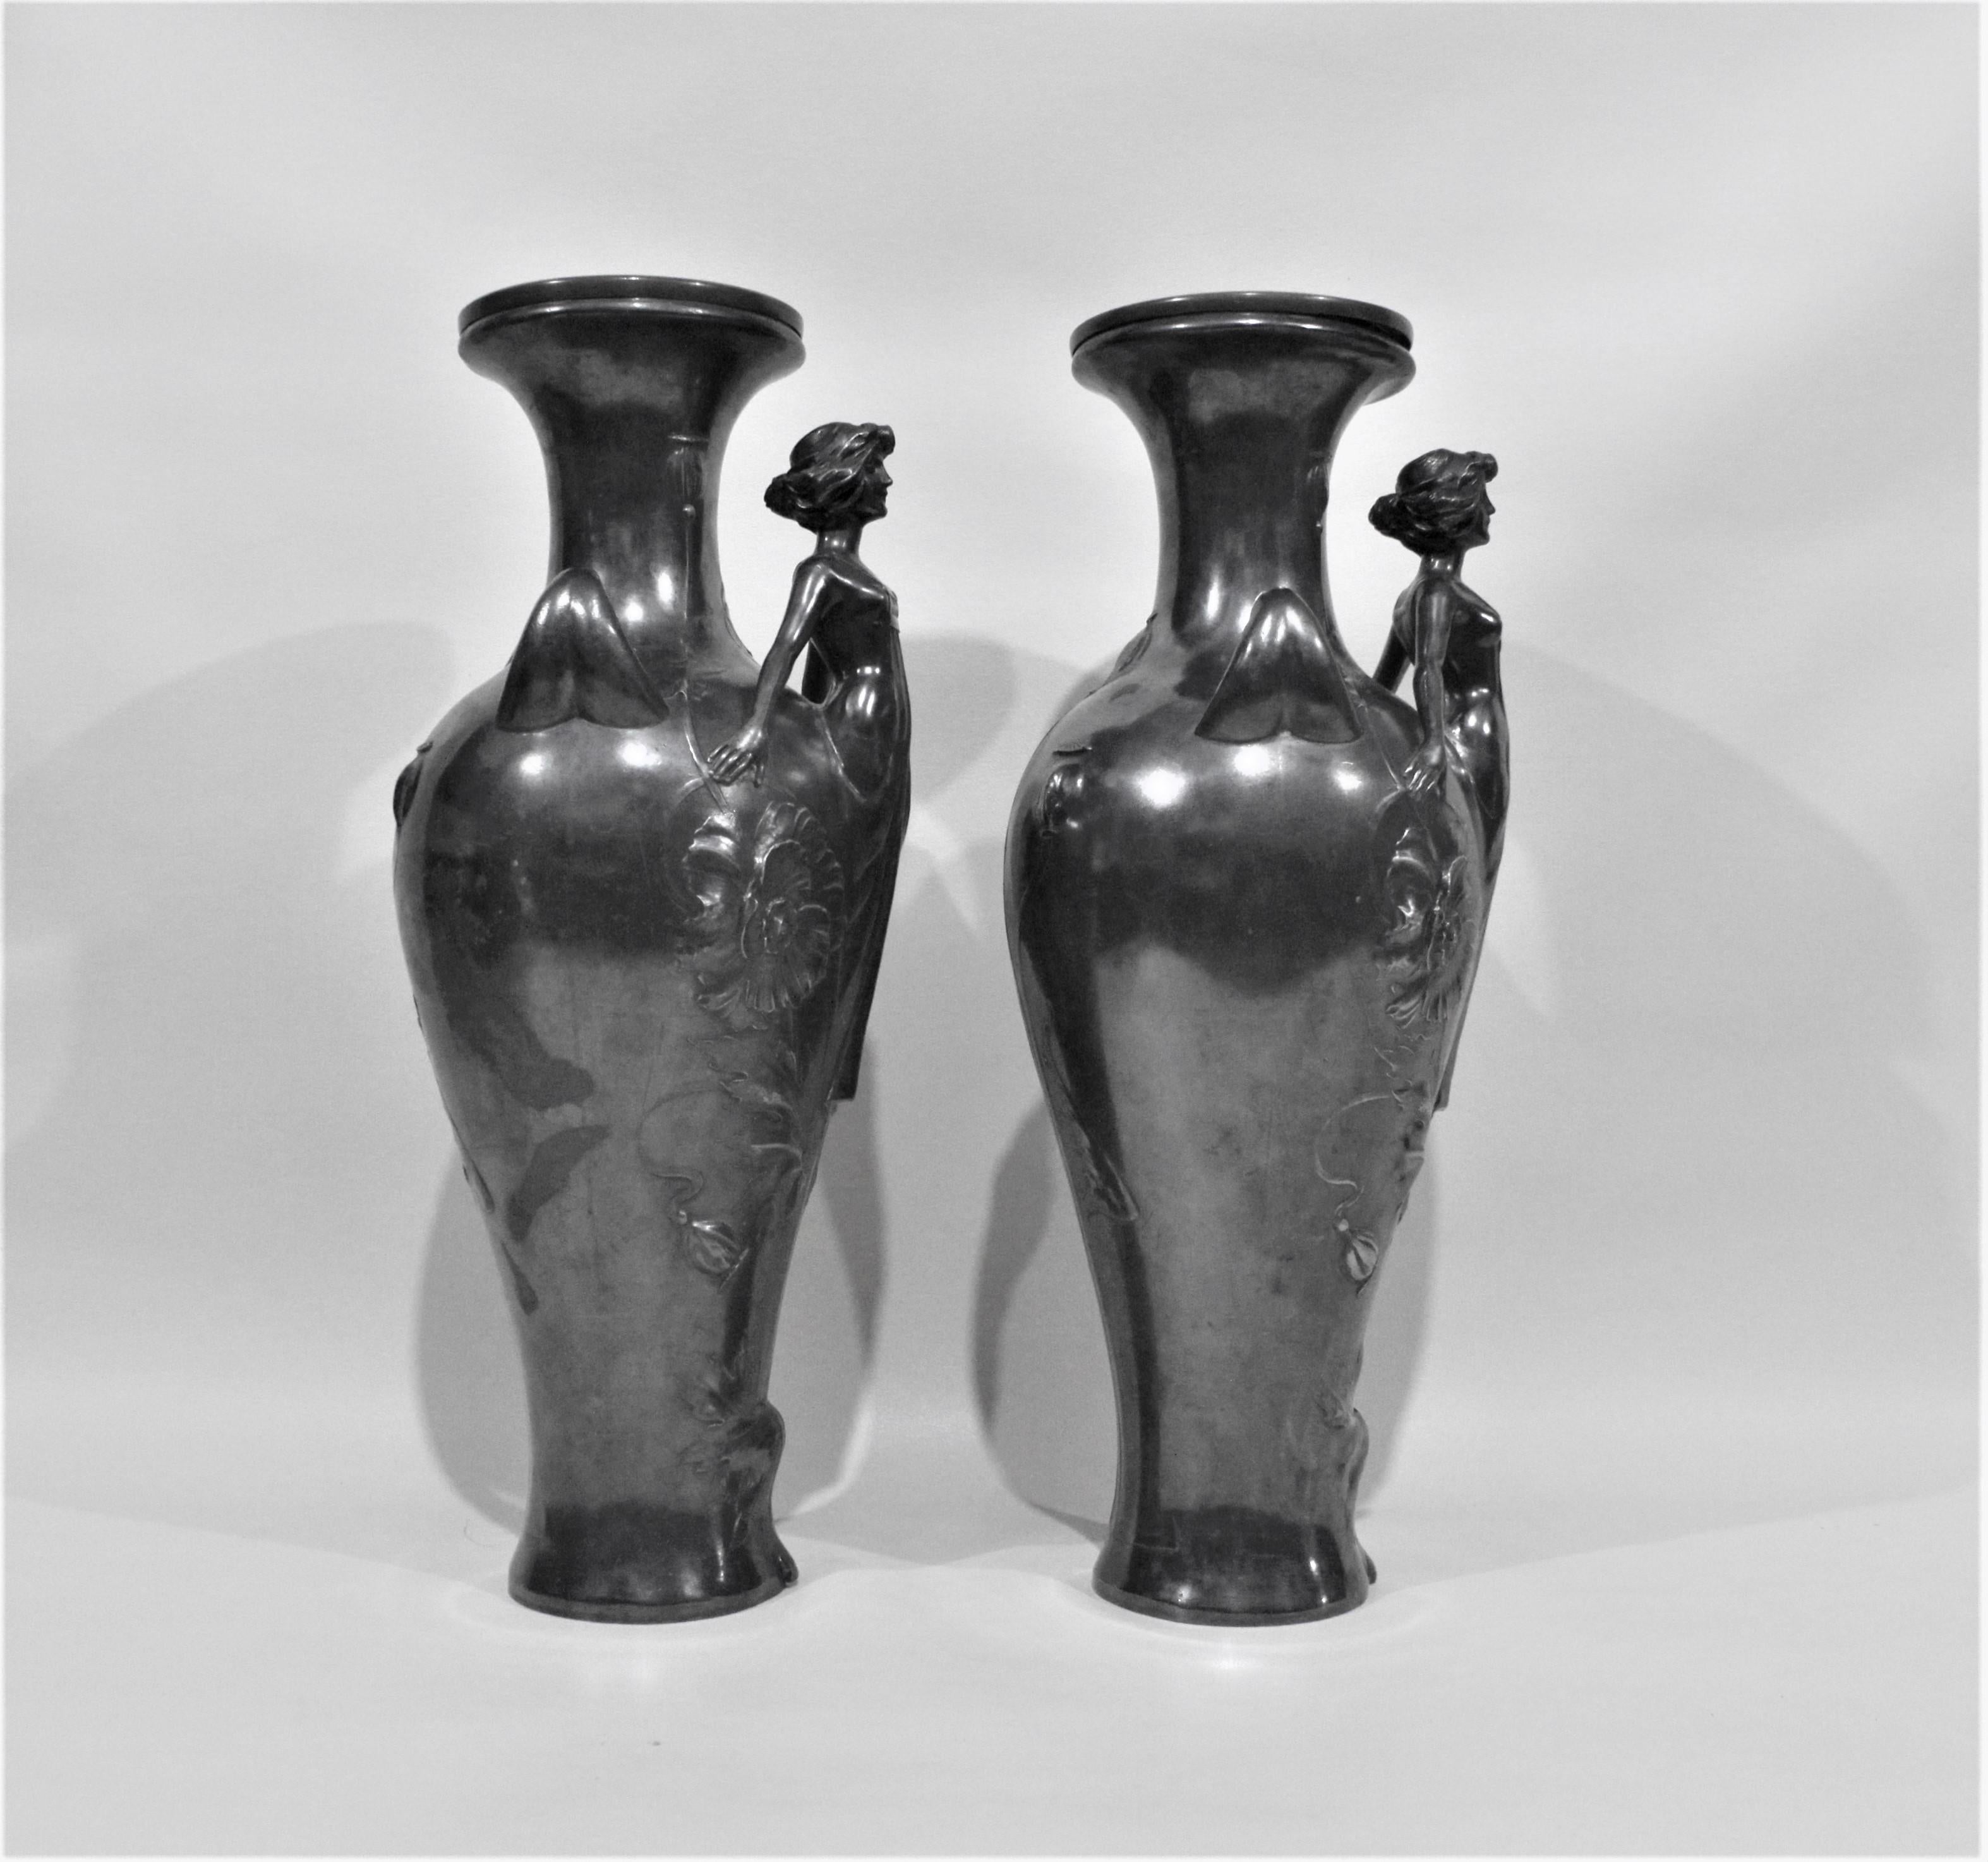 Pair of Art Nouveau Silver Plated Vases with Stylized Female Figures For Sale 3